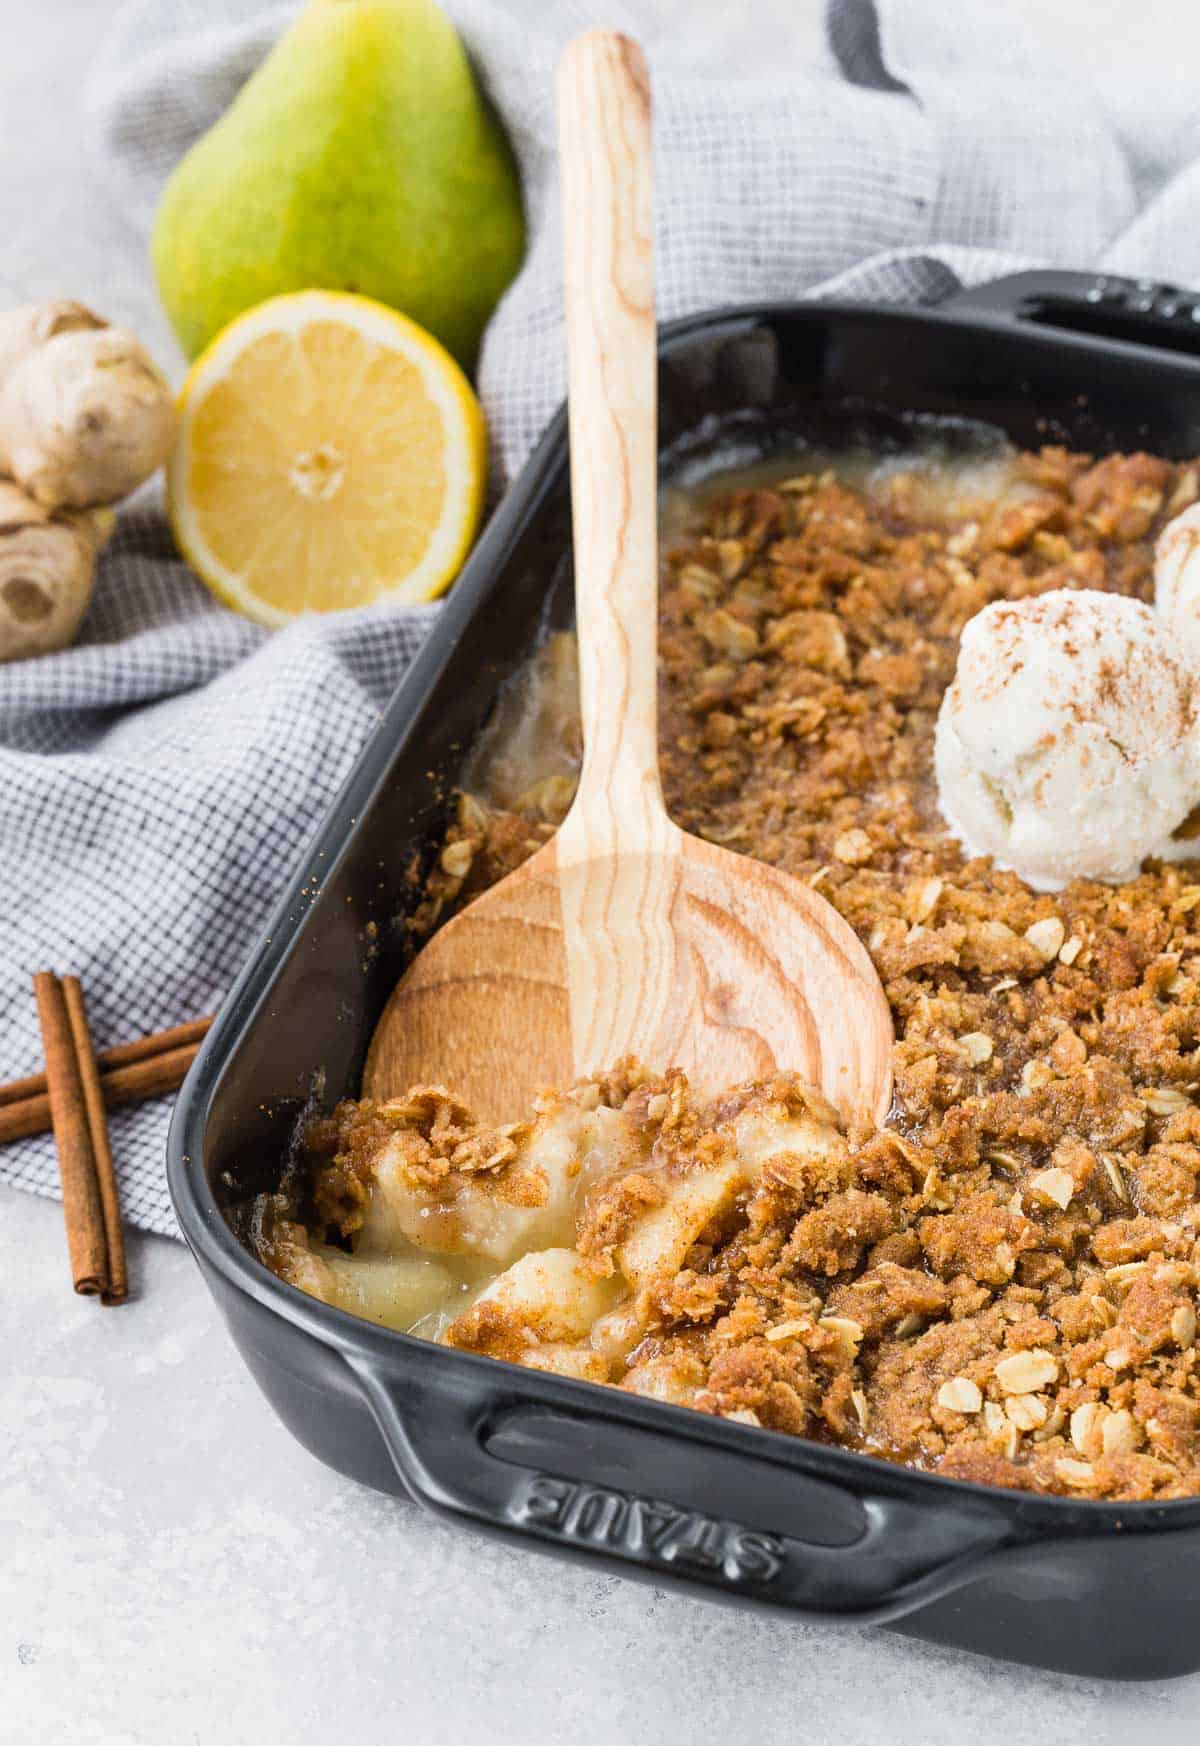 Pear and ginger crisp being scooped out of a black baking dish with a wooden spoon.